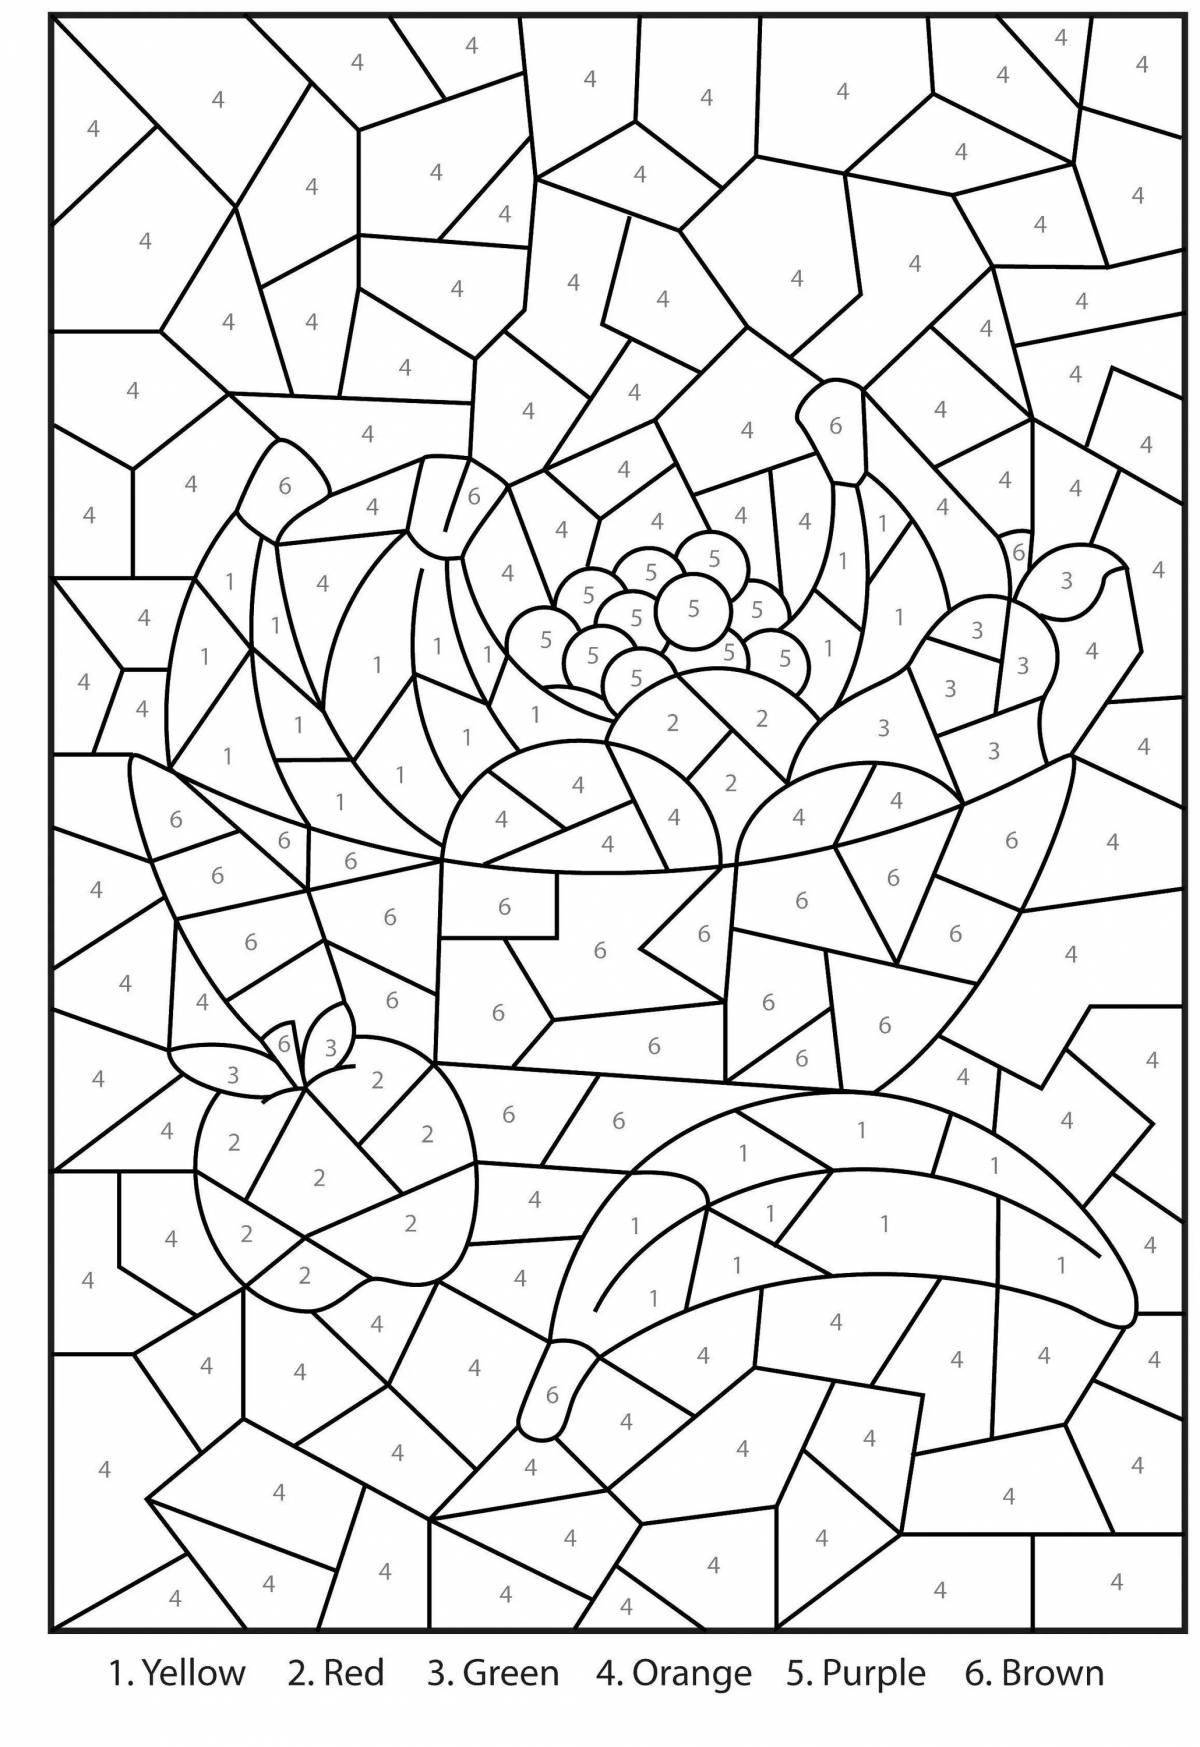 Color-joful coloring page by squares with numbers